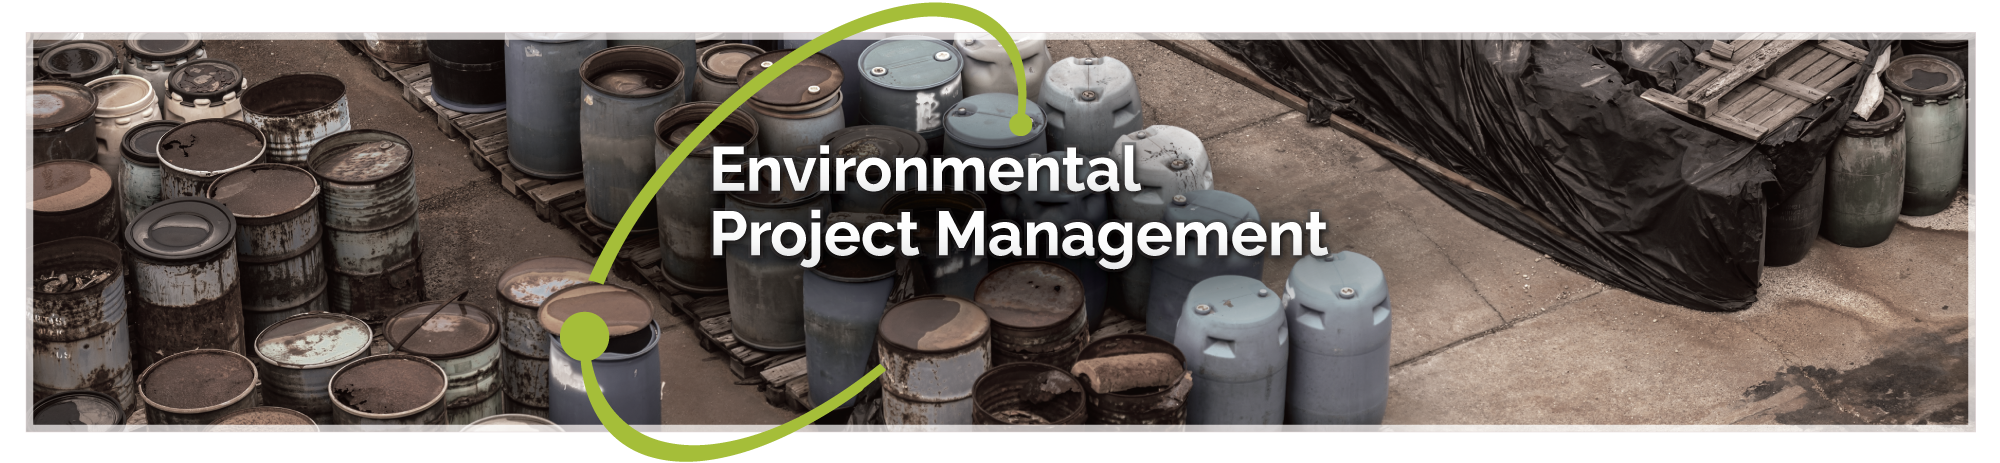 eag-environmental-project-management-main